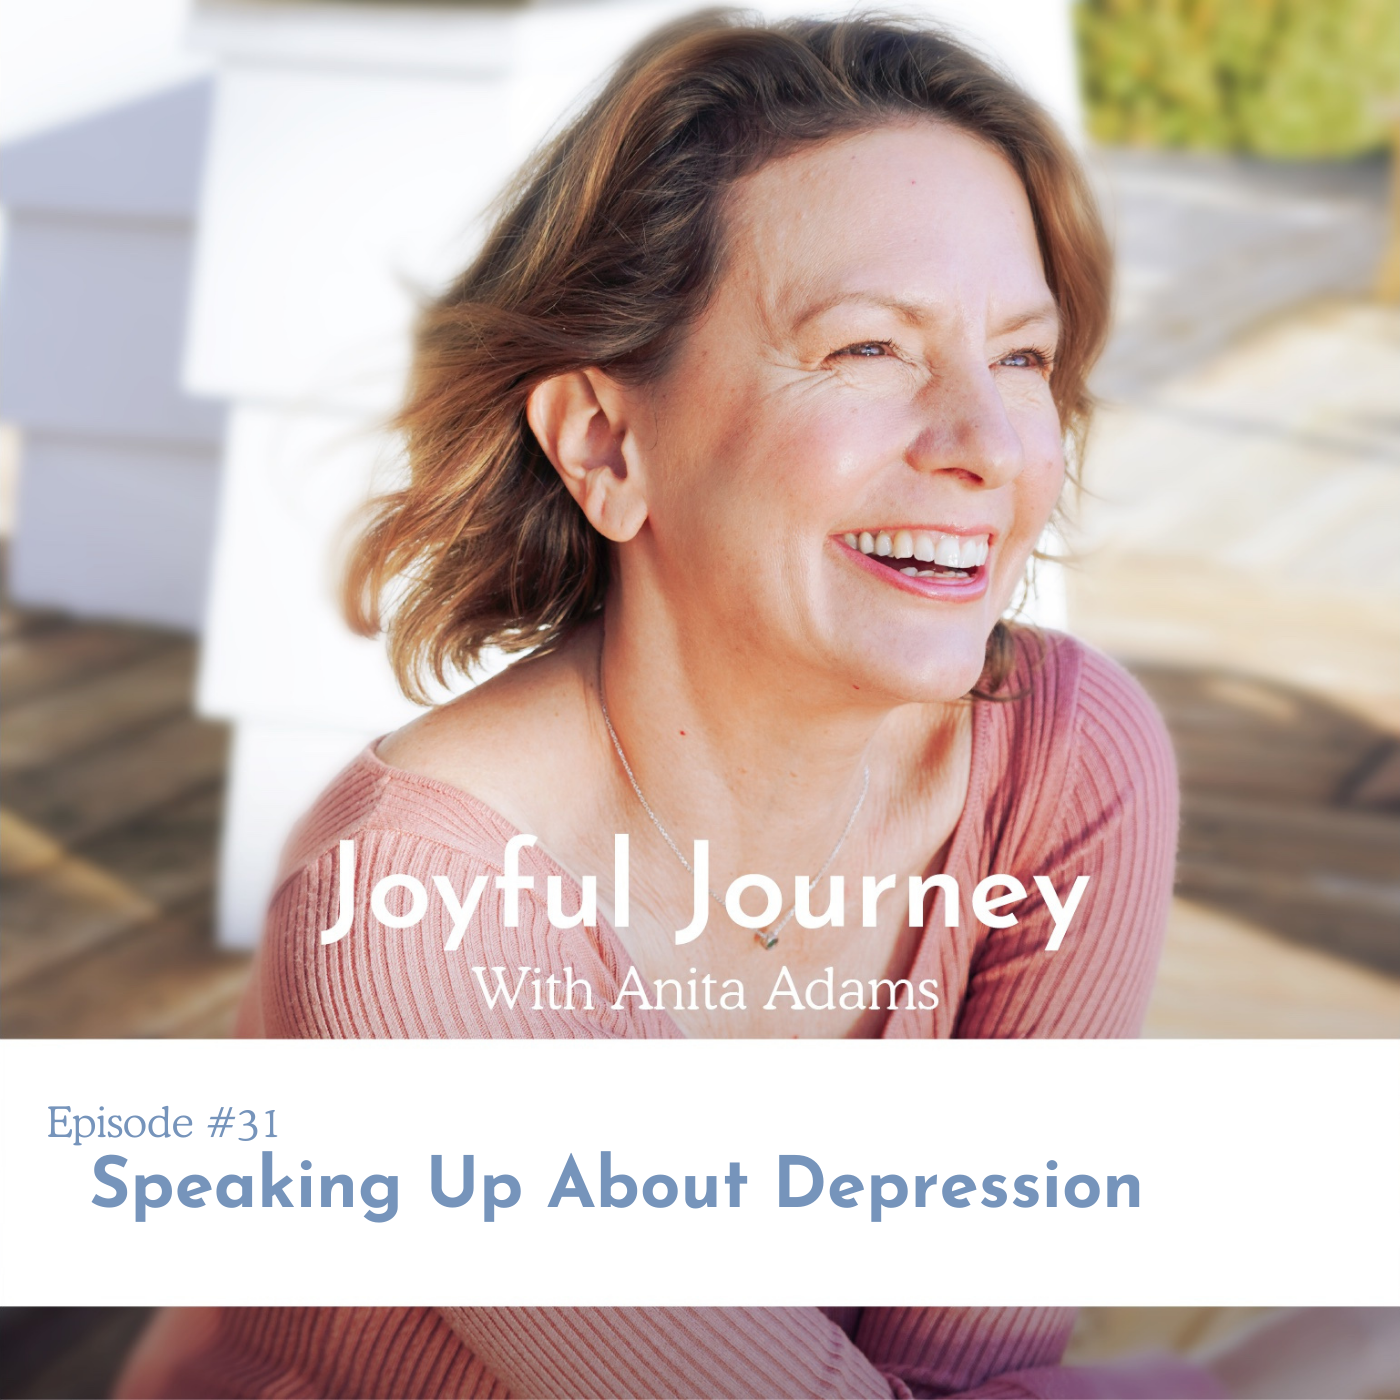 Speaking Up About Depression